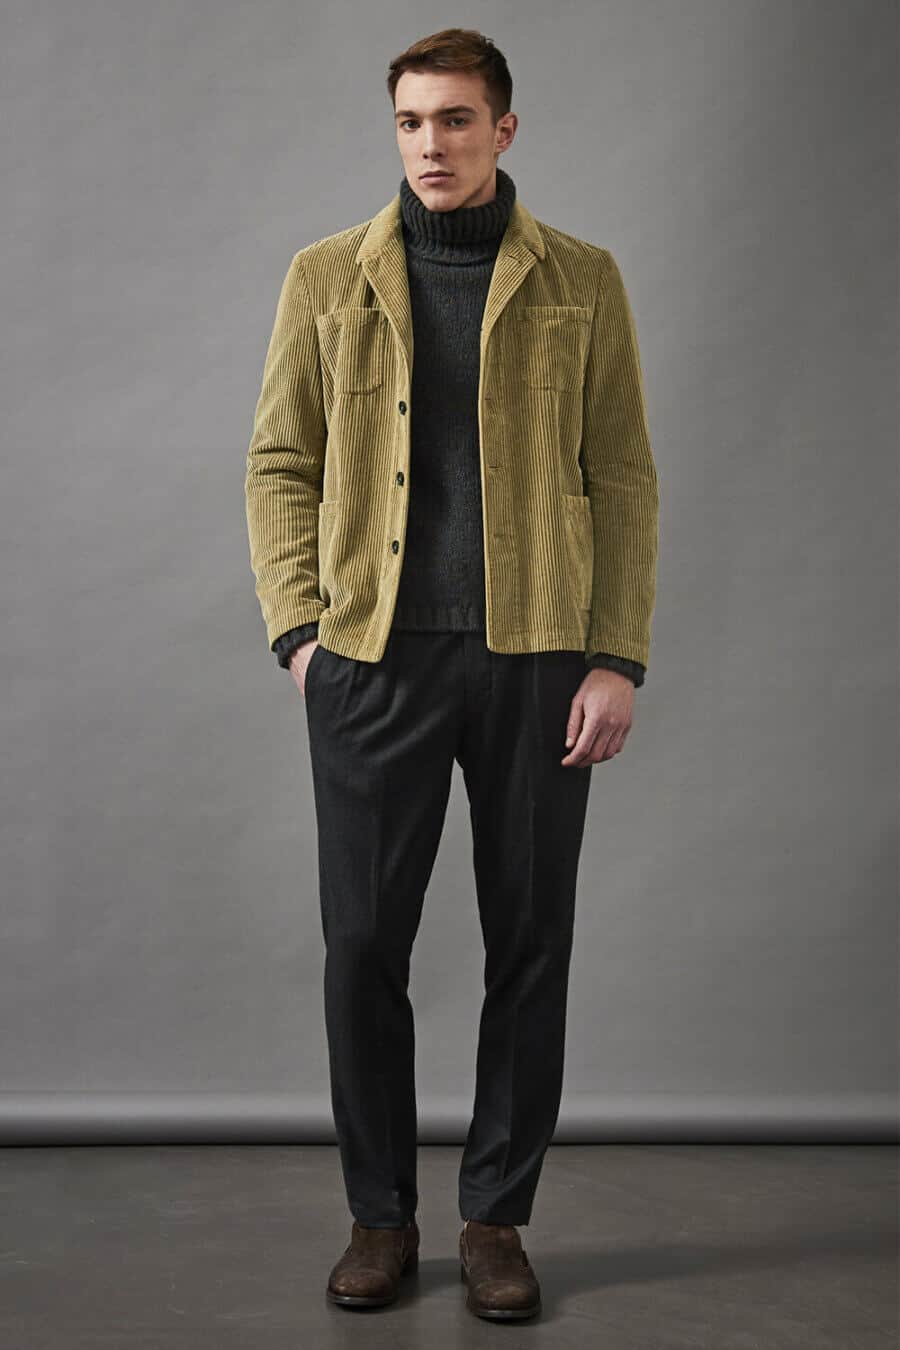 Men's turtleneck outfit with a chore coat, jeans and boots